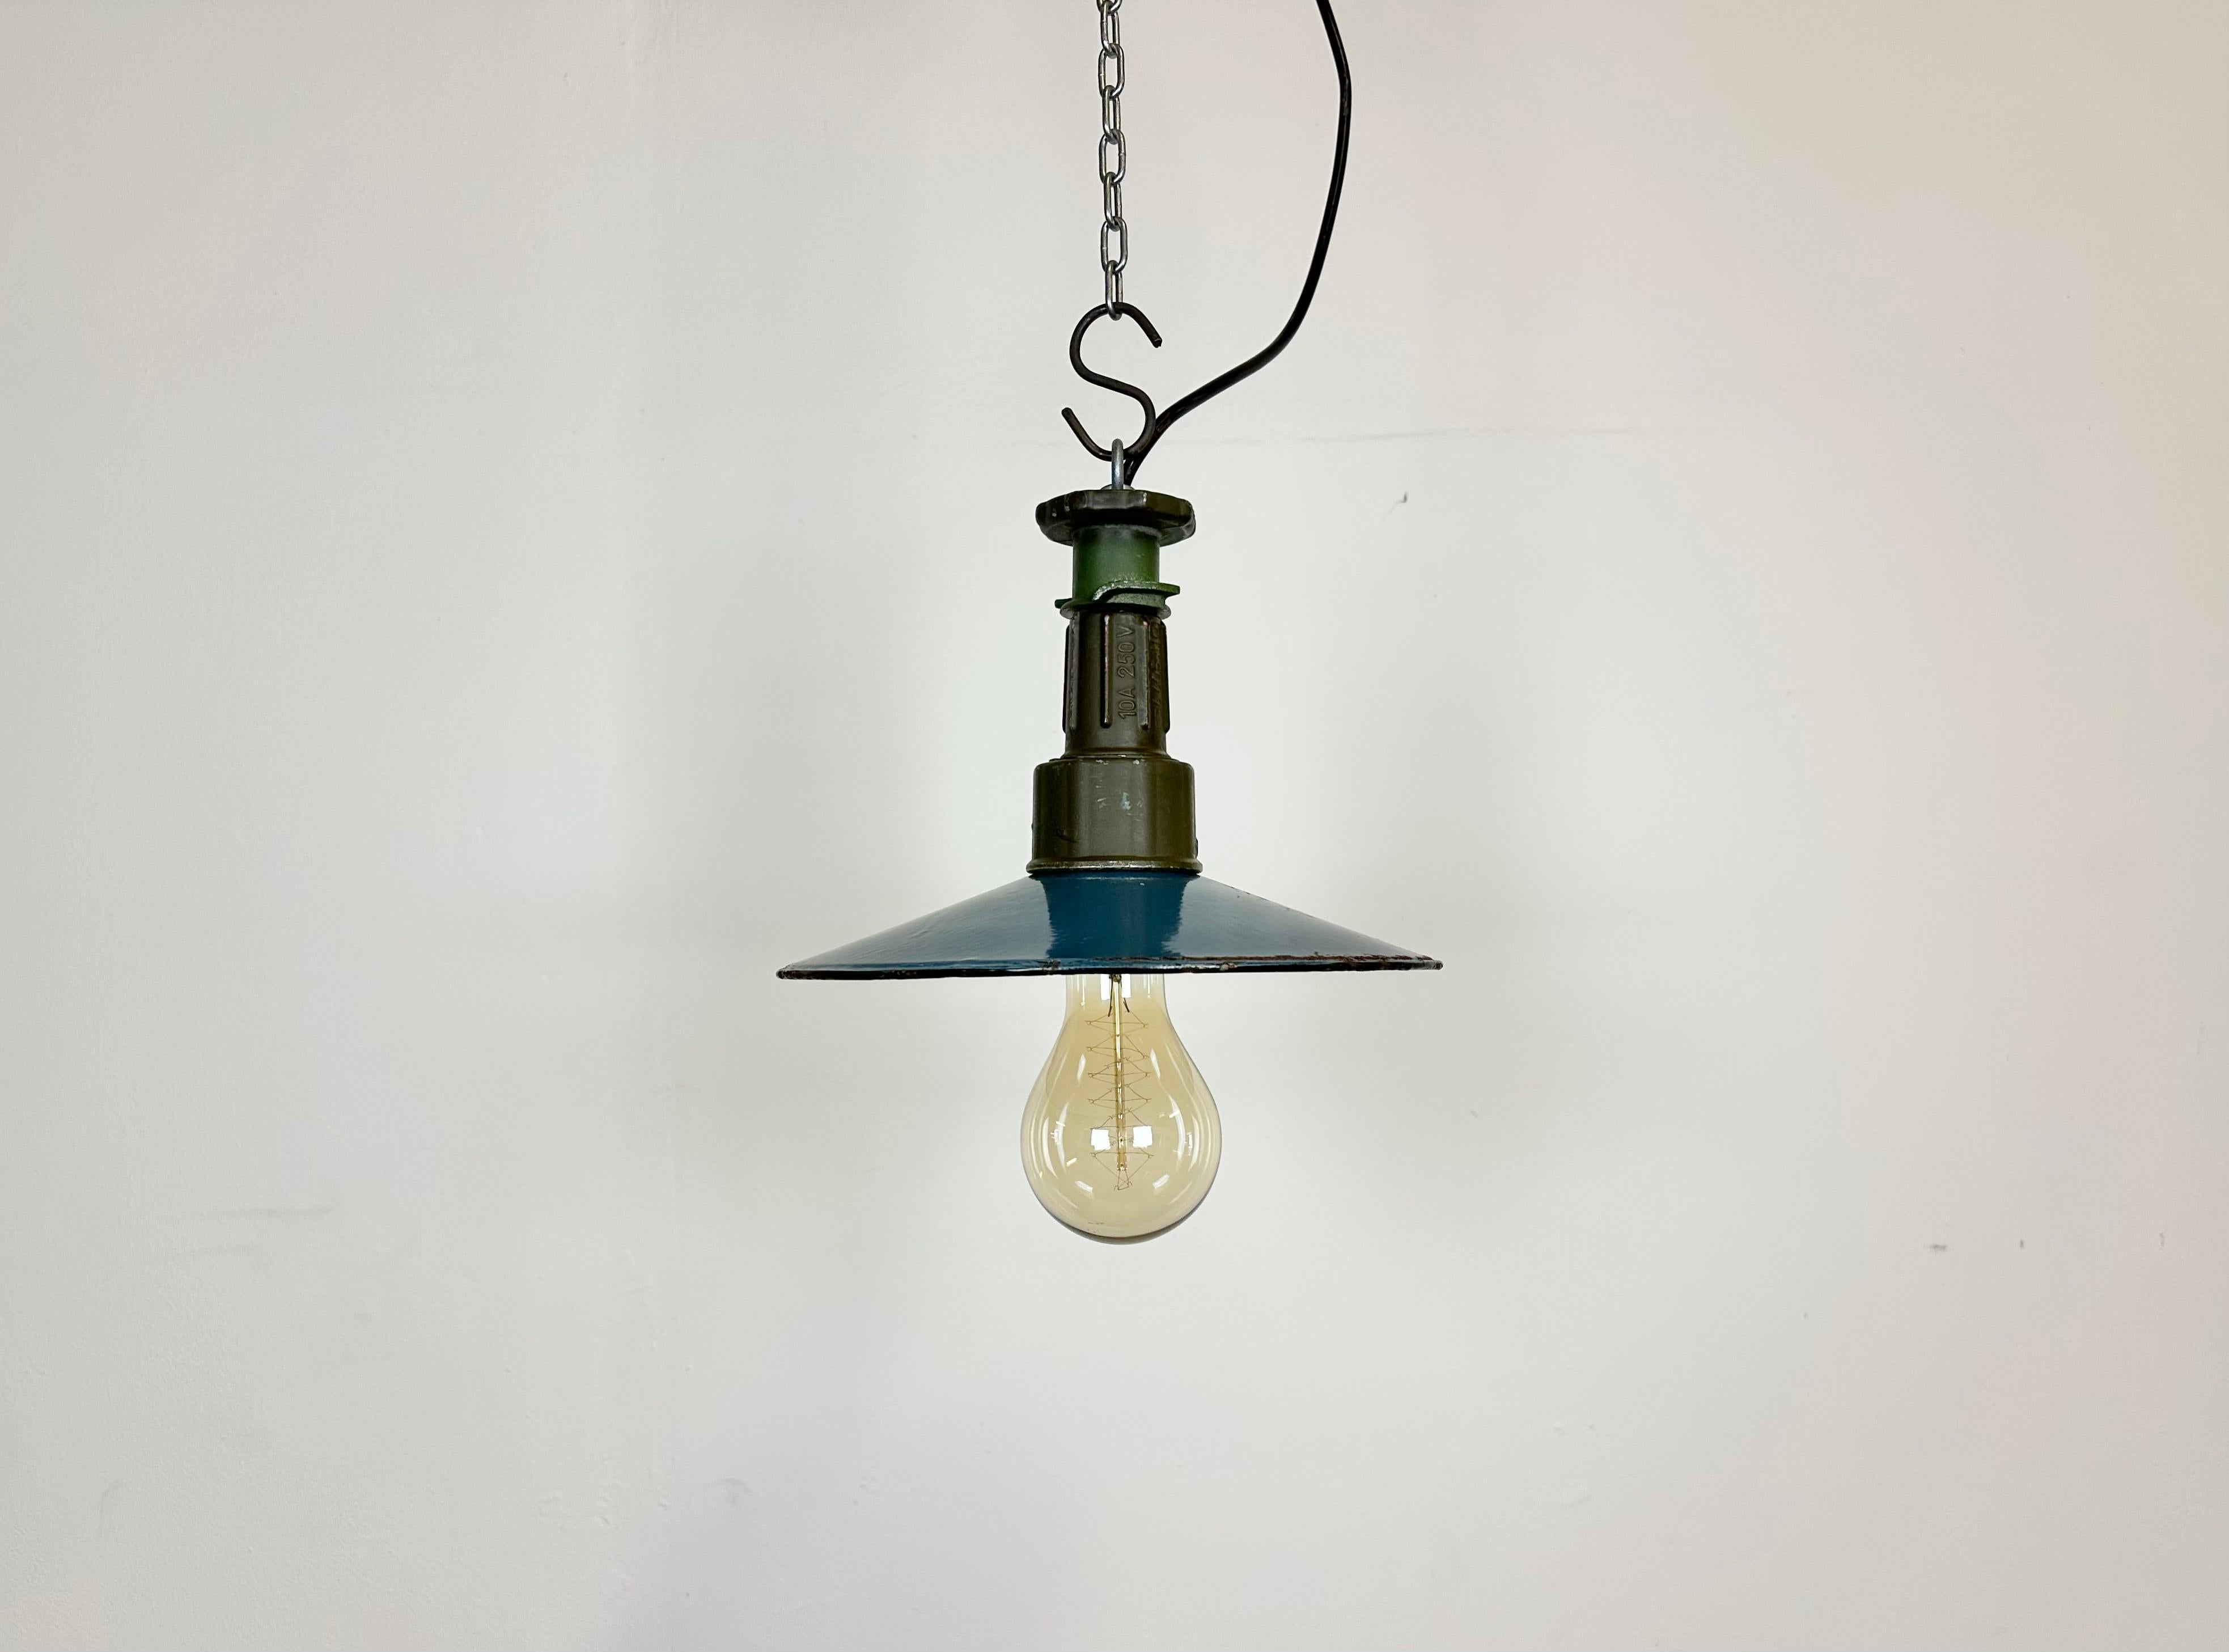 Industrial blue enamel pendant light made in Poland during the 1960s. White enamel inside the shade. Green cast aluminium top. The socket requires E 27/ E26 light bulbs. New wire. The weight of the lamp is 0,5 kg.
The light bulb is not included.